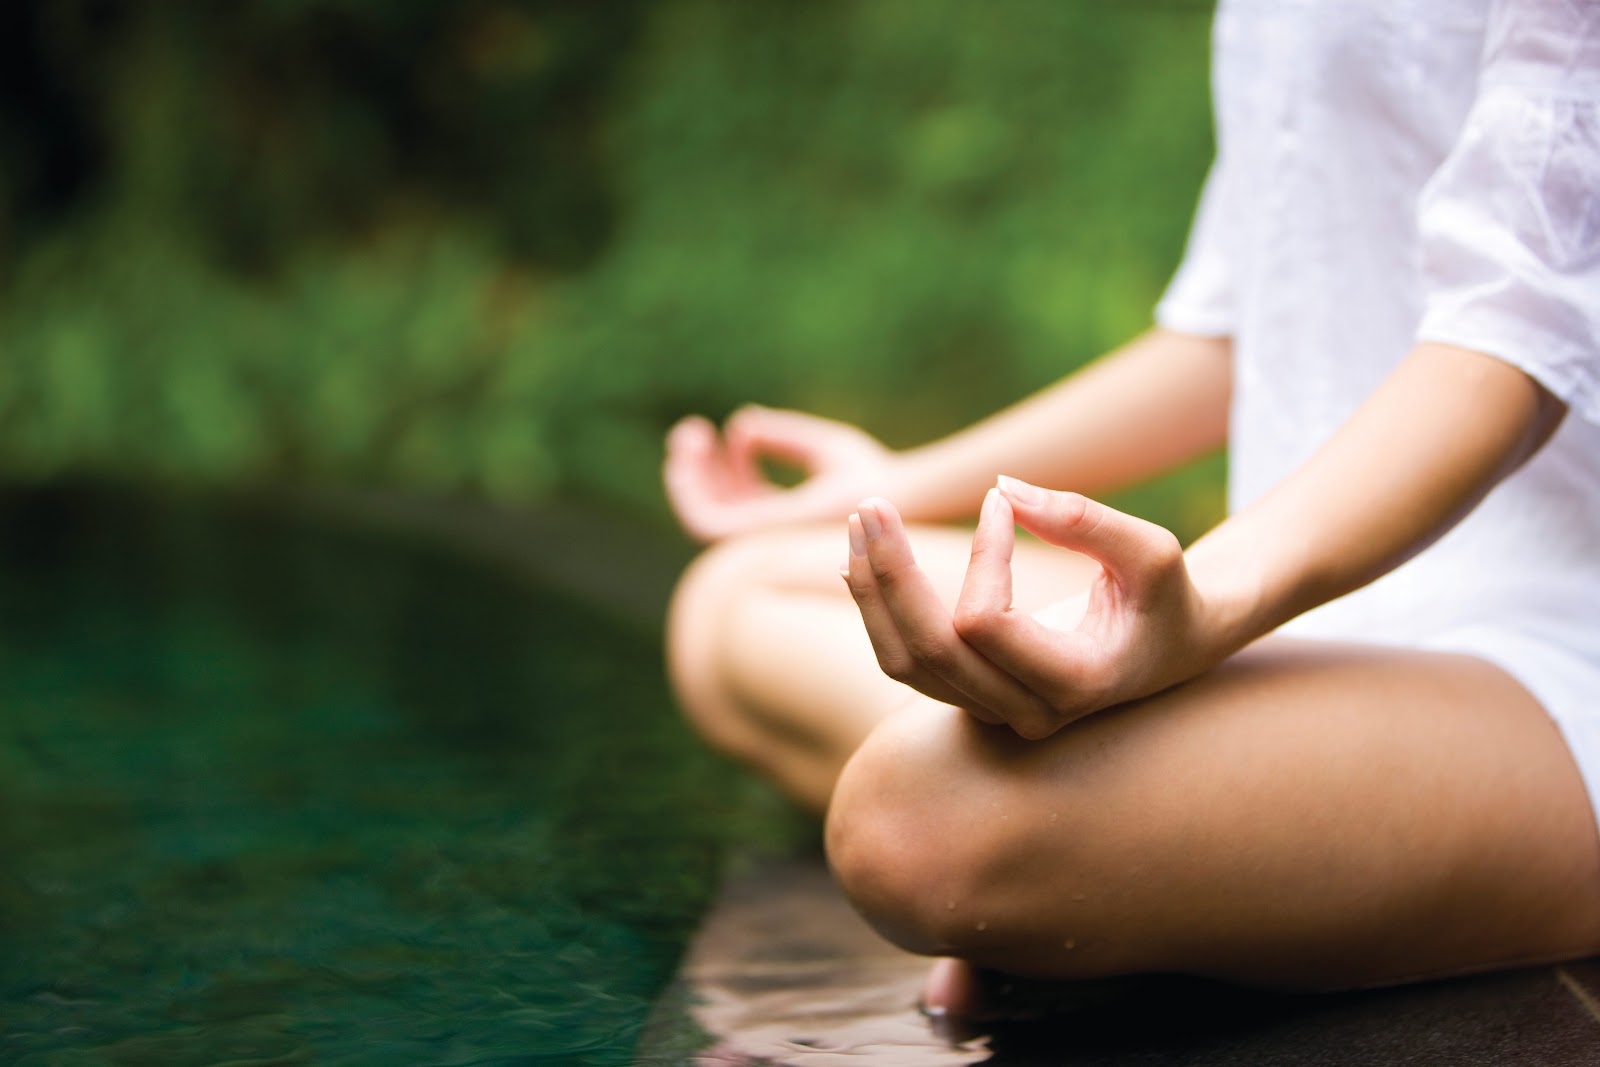 7 Essential Tips on How to Meditate Properly